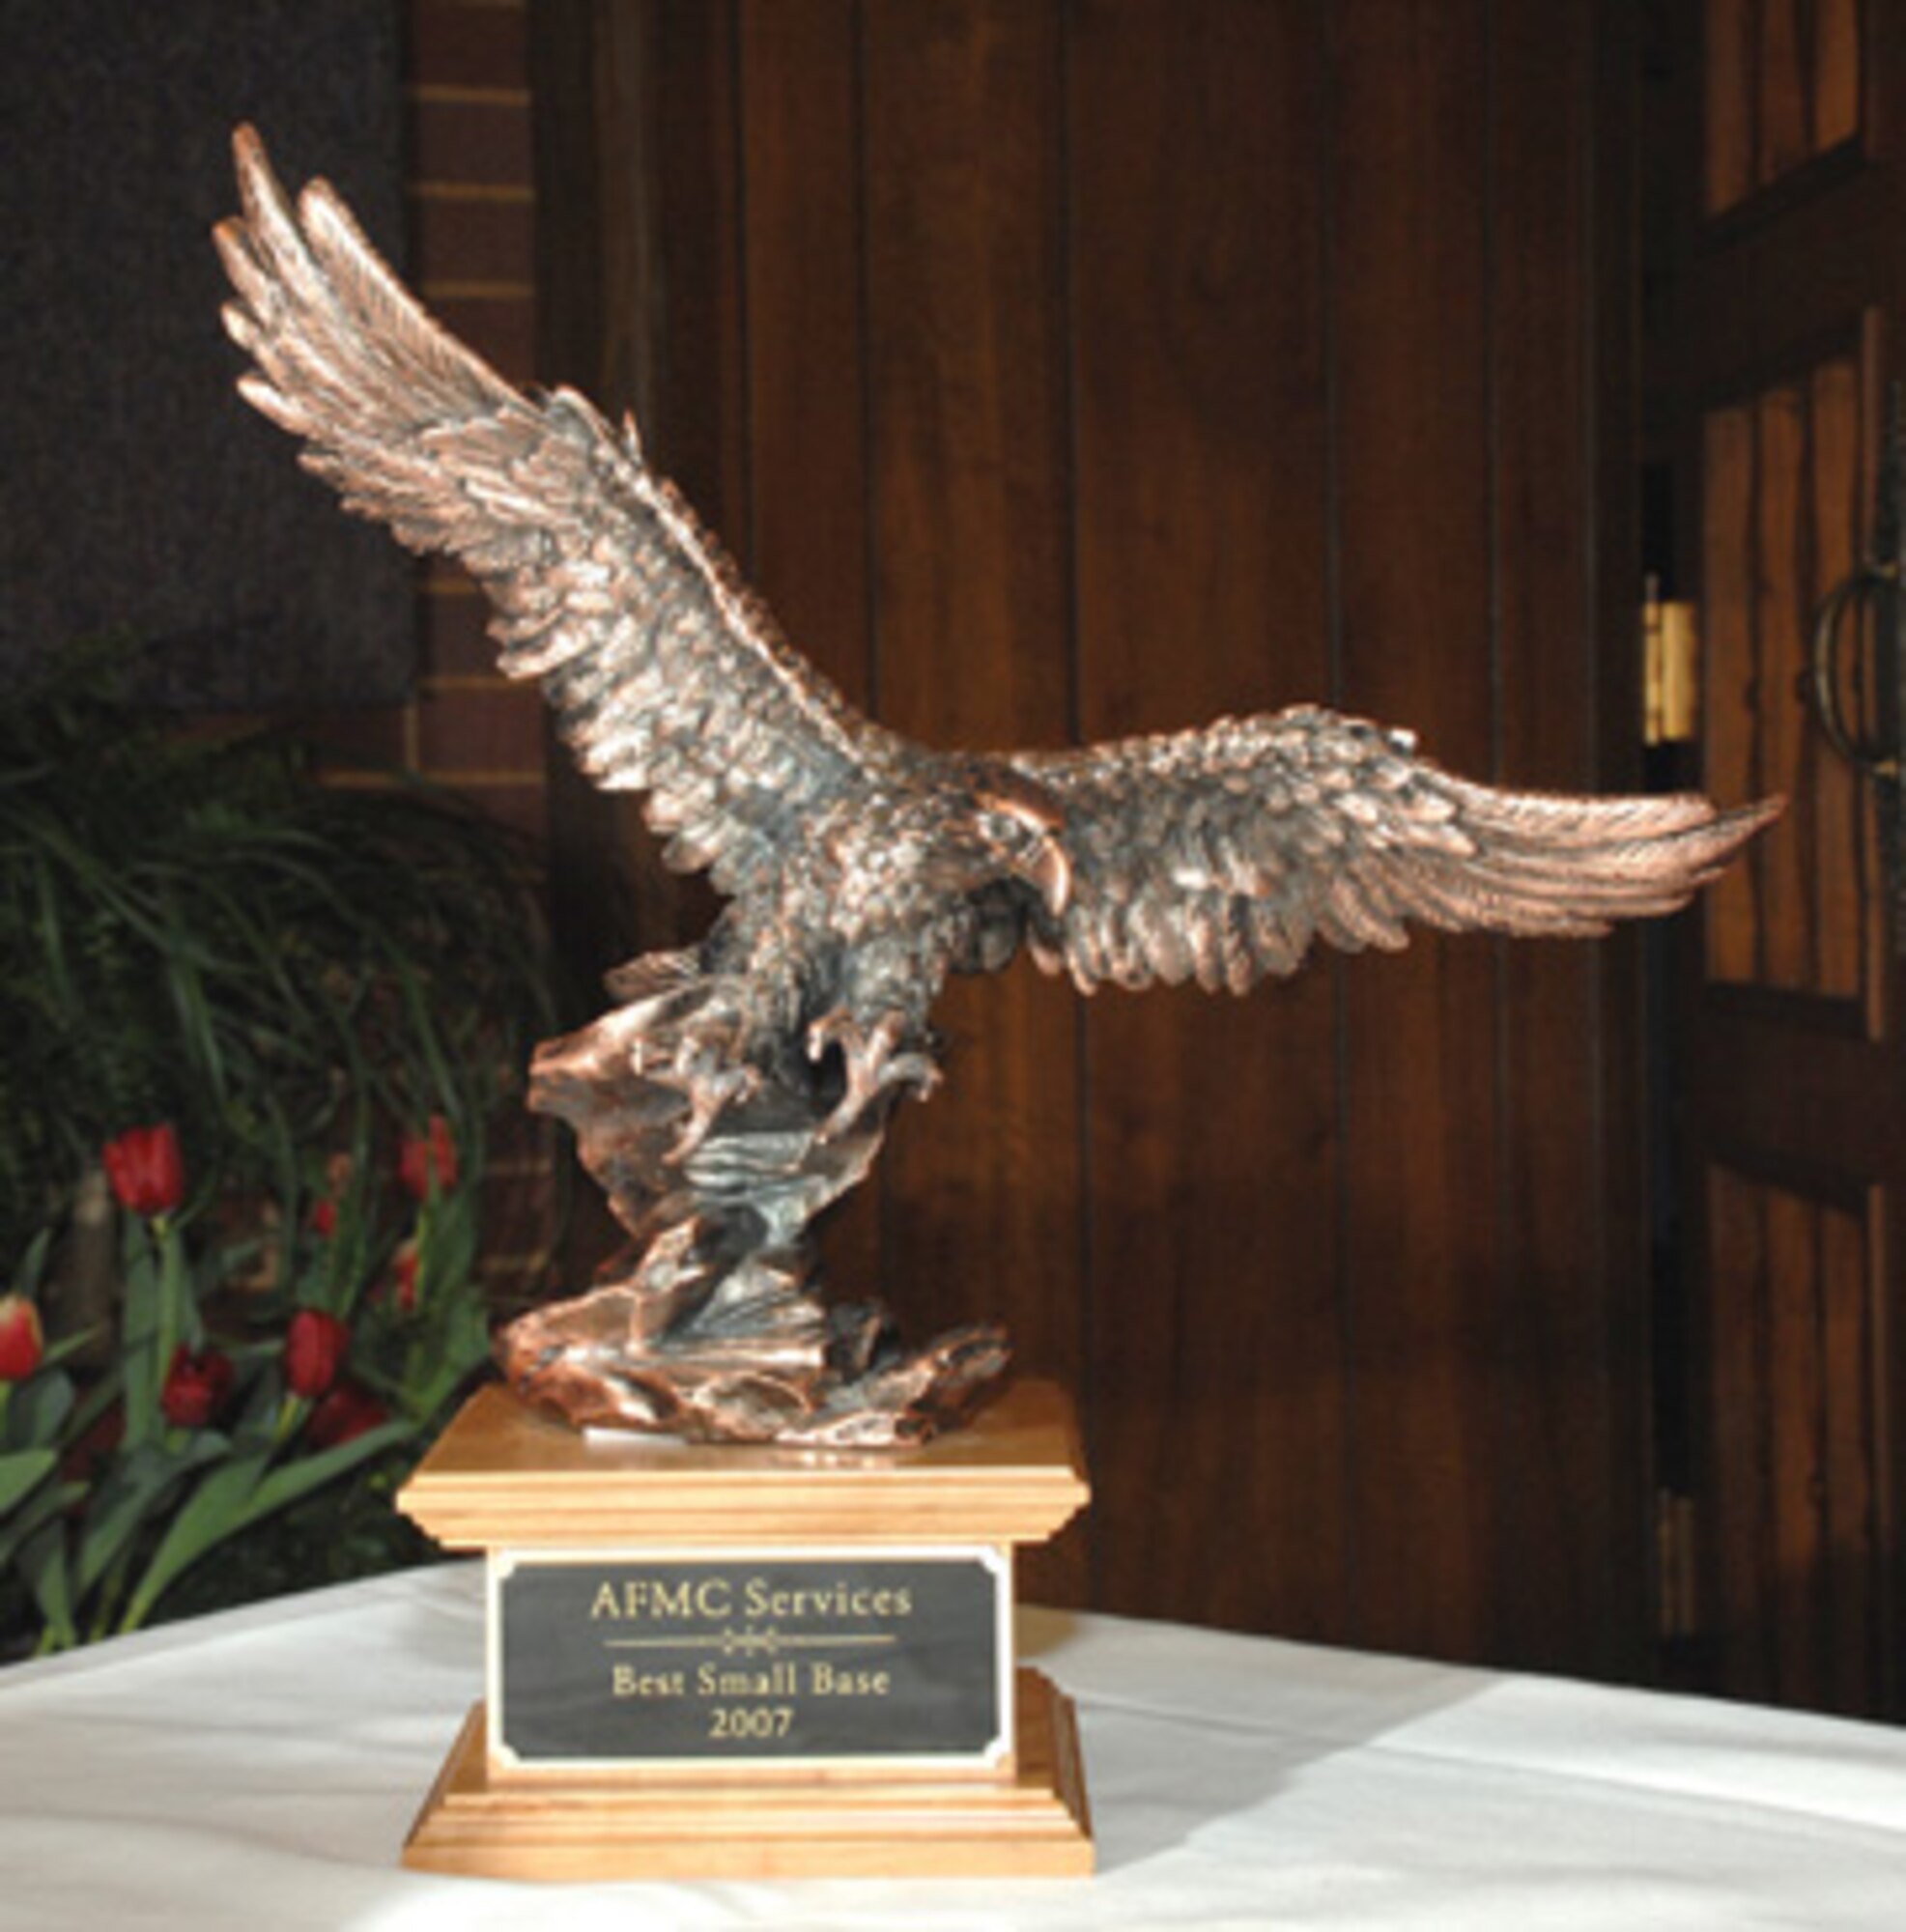 The 2007 AFMC Services best small base award.